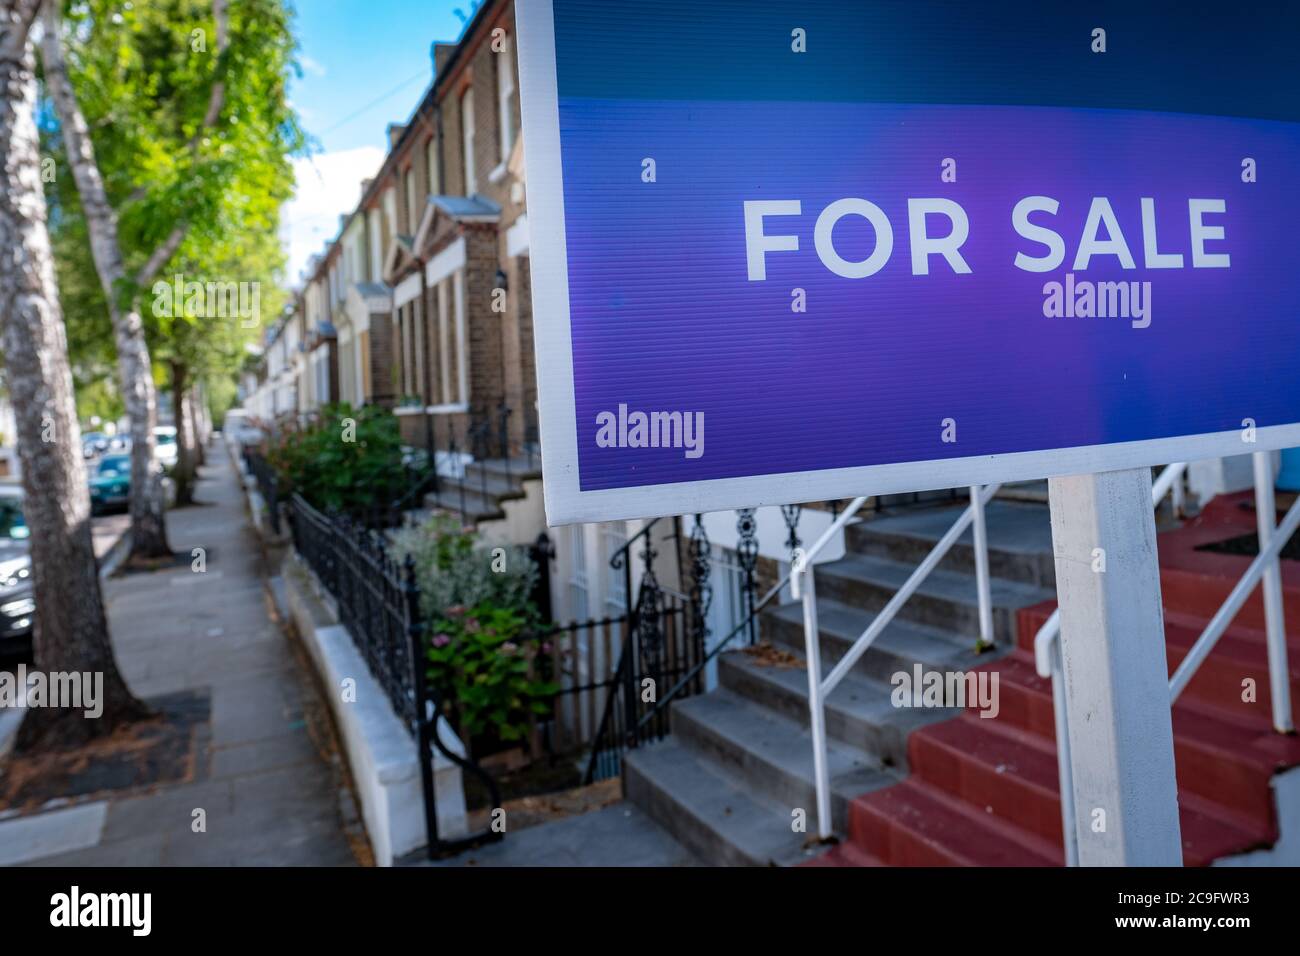 'FOR SALE' estate agency sign on street of houses Stock Photo